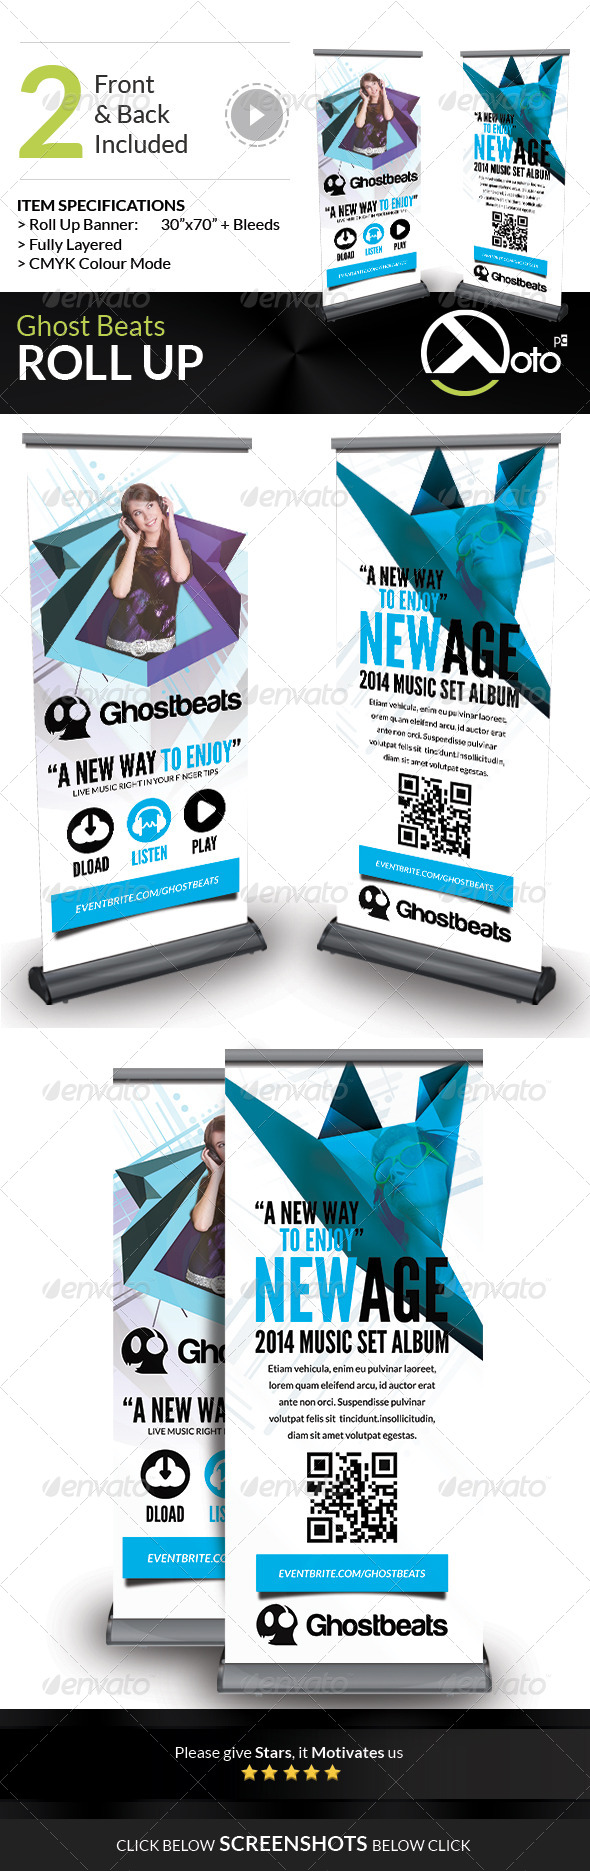 GraphicRiver Ghost Beats Music Downloads Roll Up 7666081